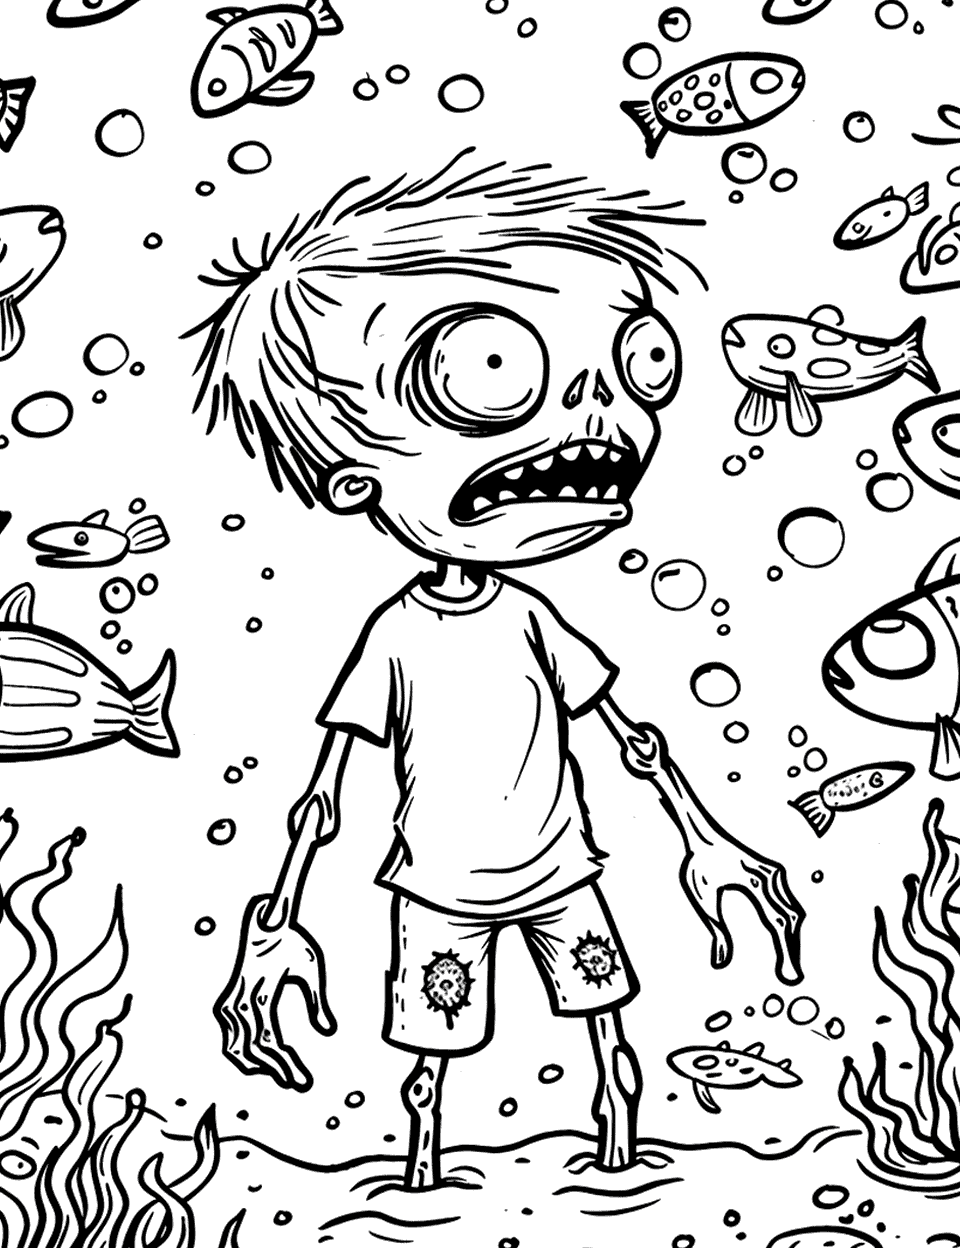 Underwater Zombie Coloring Page - A zombie walking on the ocean floor among fish.